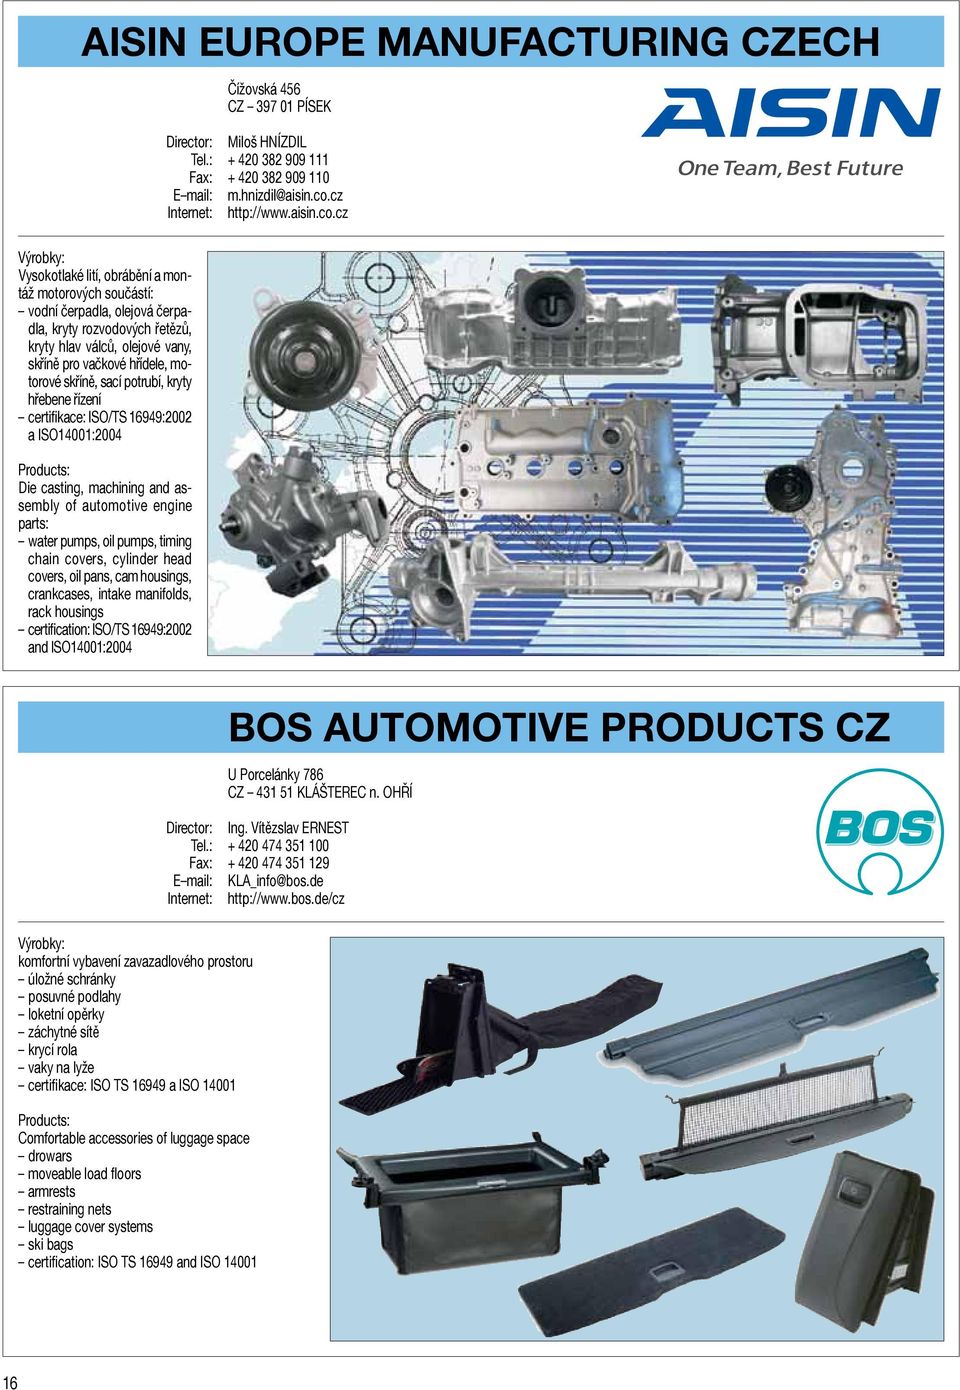 pumps, timing chain covers, cylinder head covers, oil pans, cam housings, crankcases, intake manifolds, rack housings certification: ISO/TS 16949:2002 and ISO14001:2004 Čížovská 456 CZ 397 01 PÍSEK